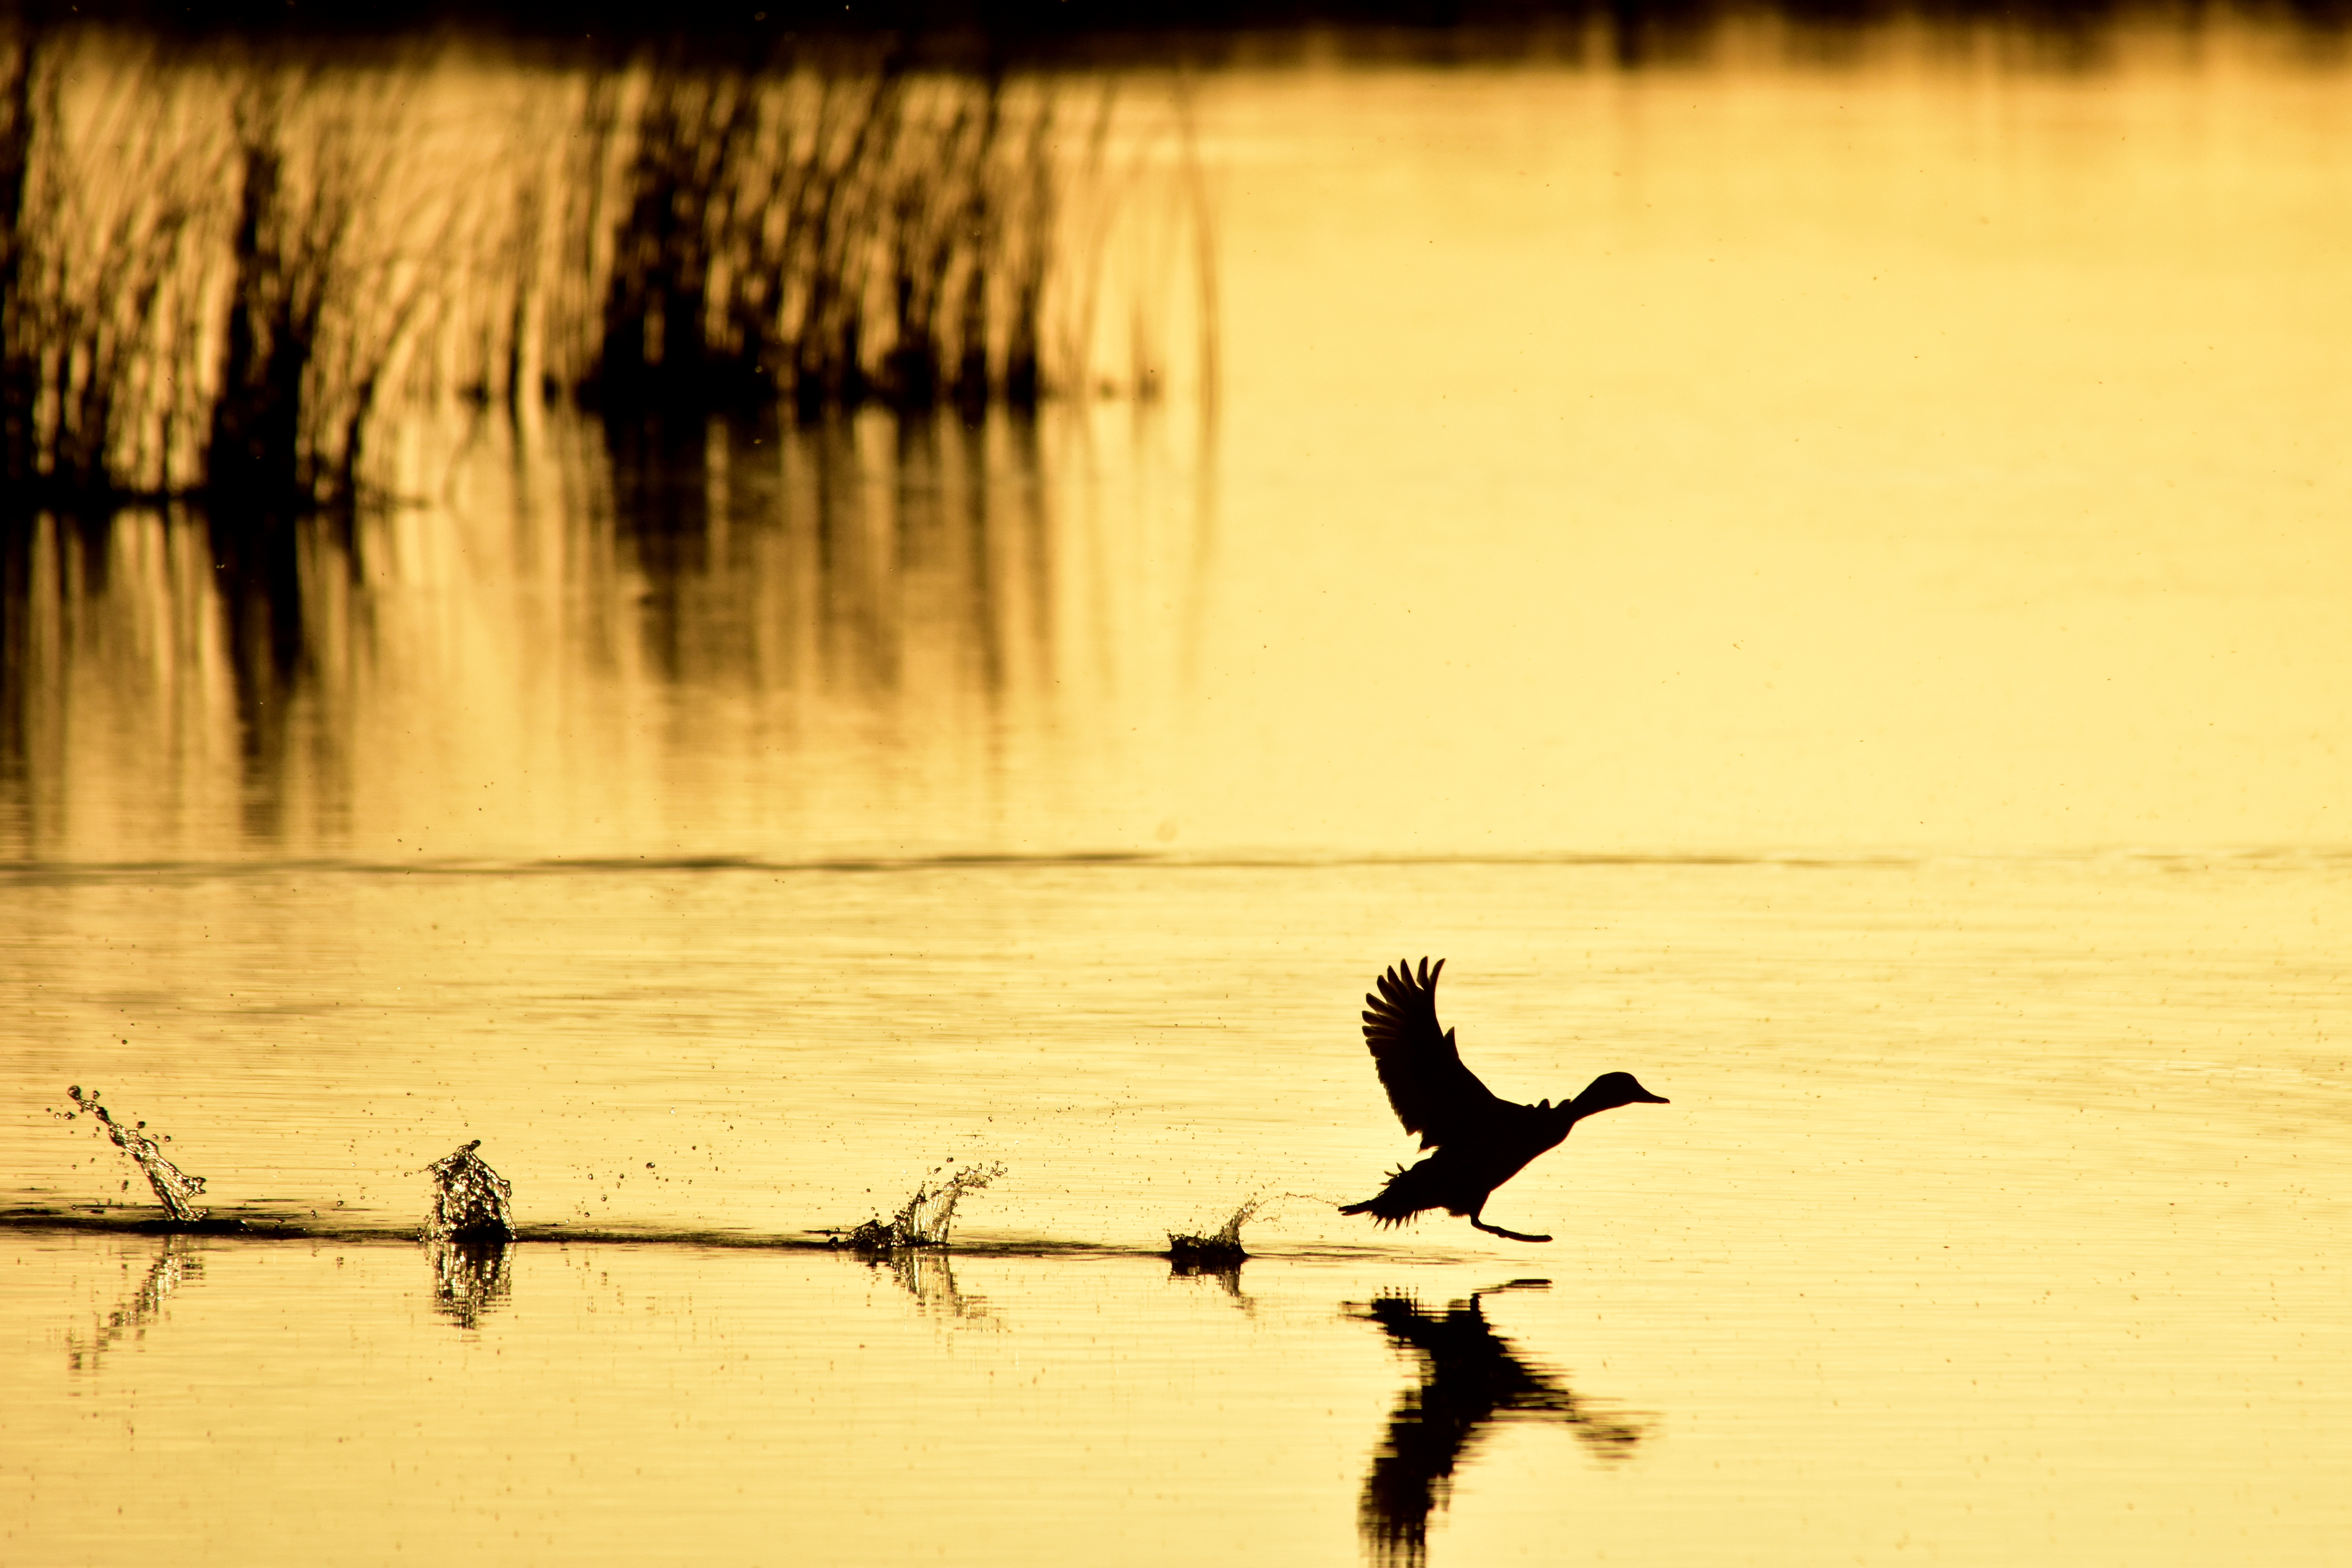 A redhead duck runs across the water on takeoff